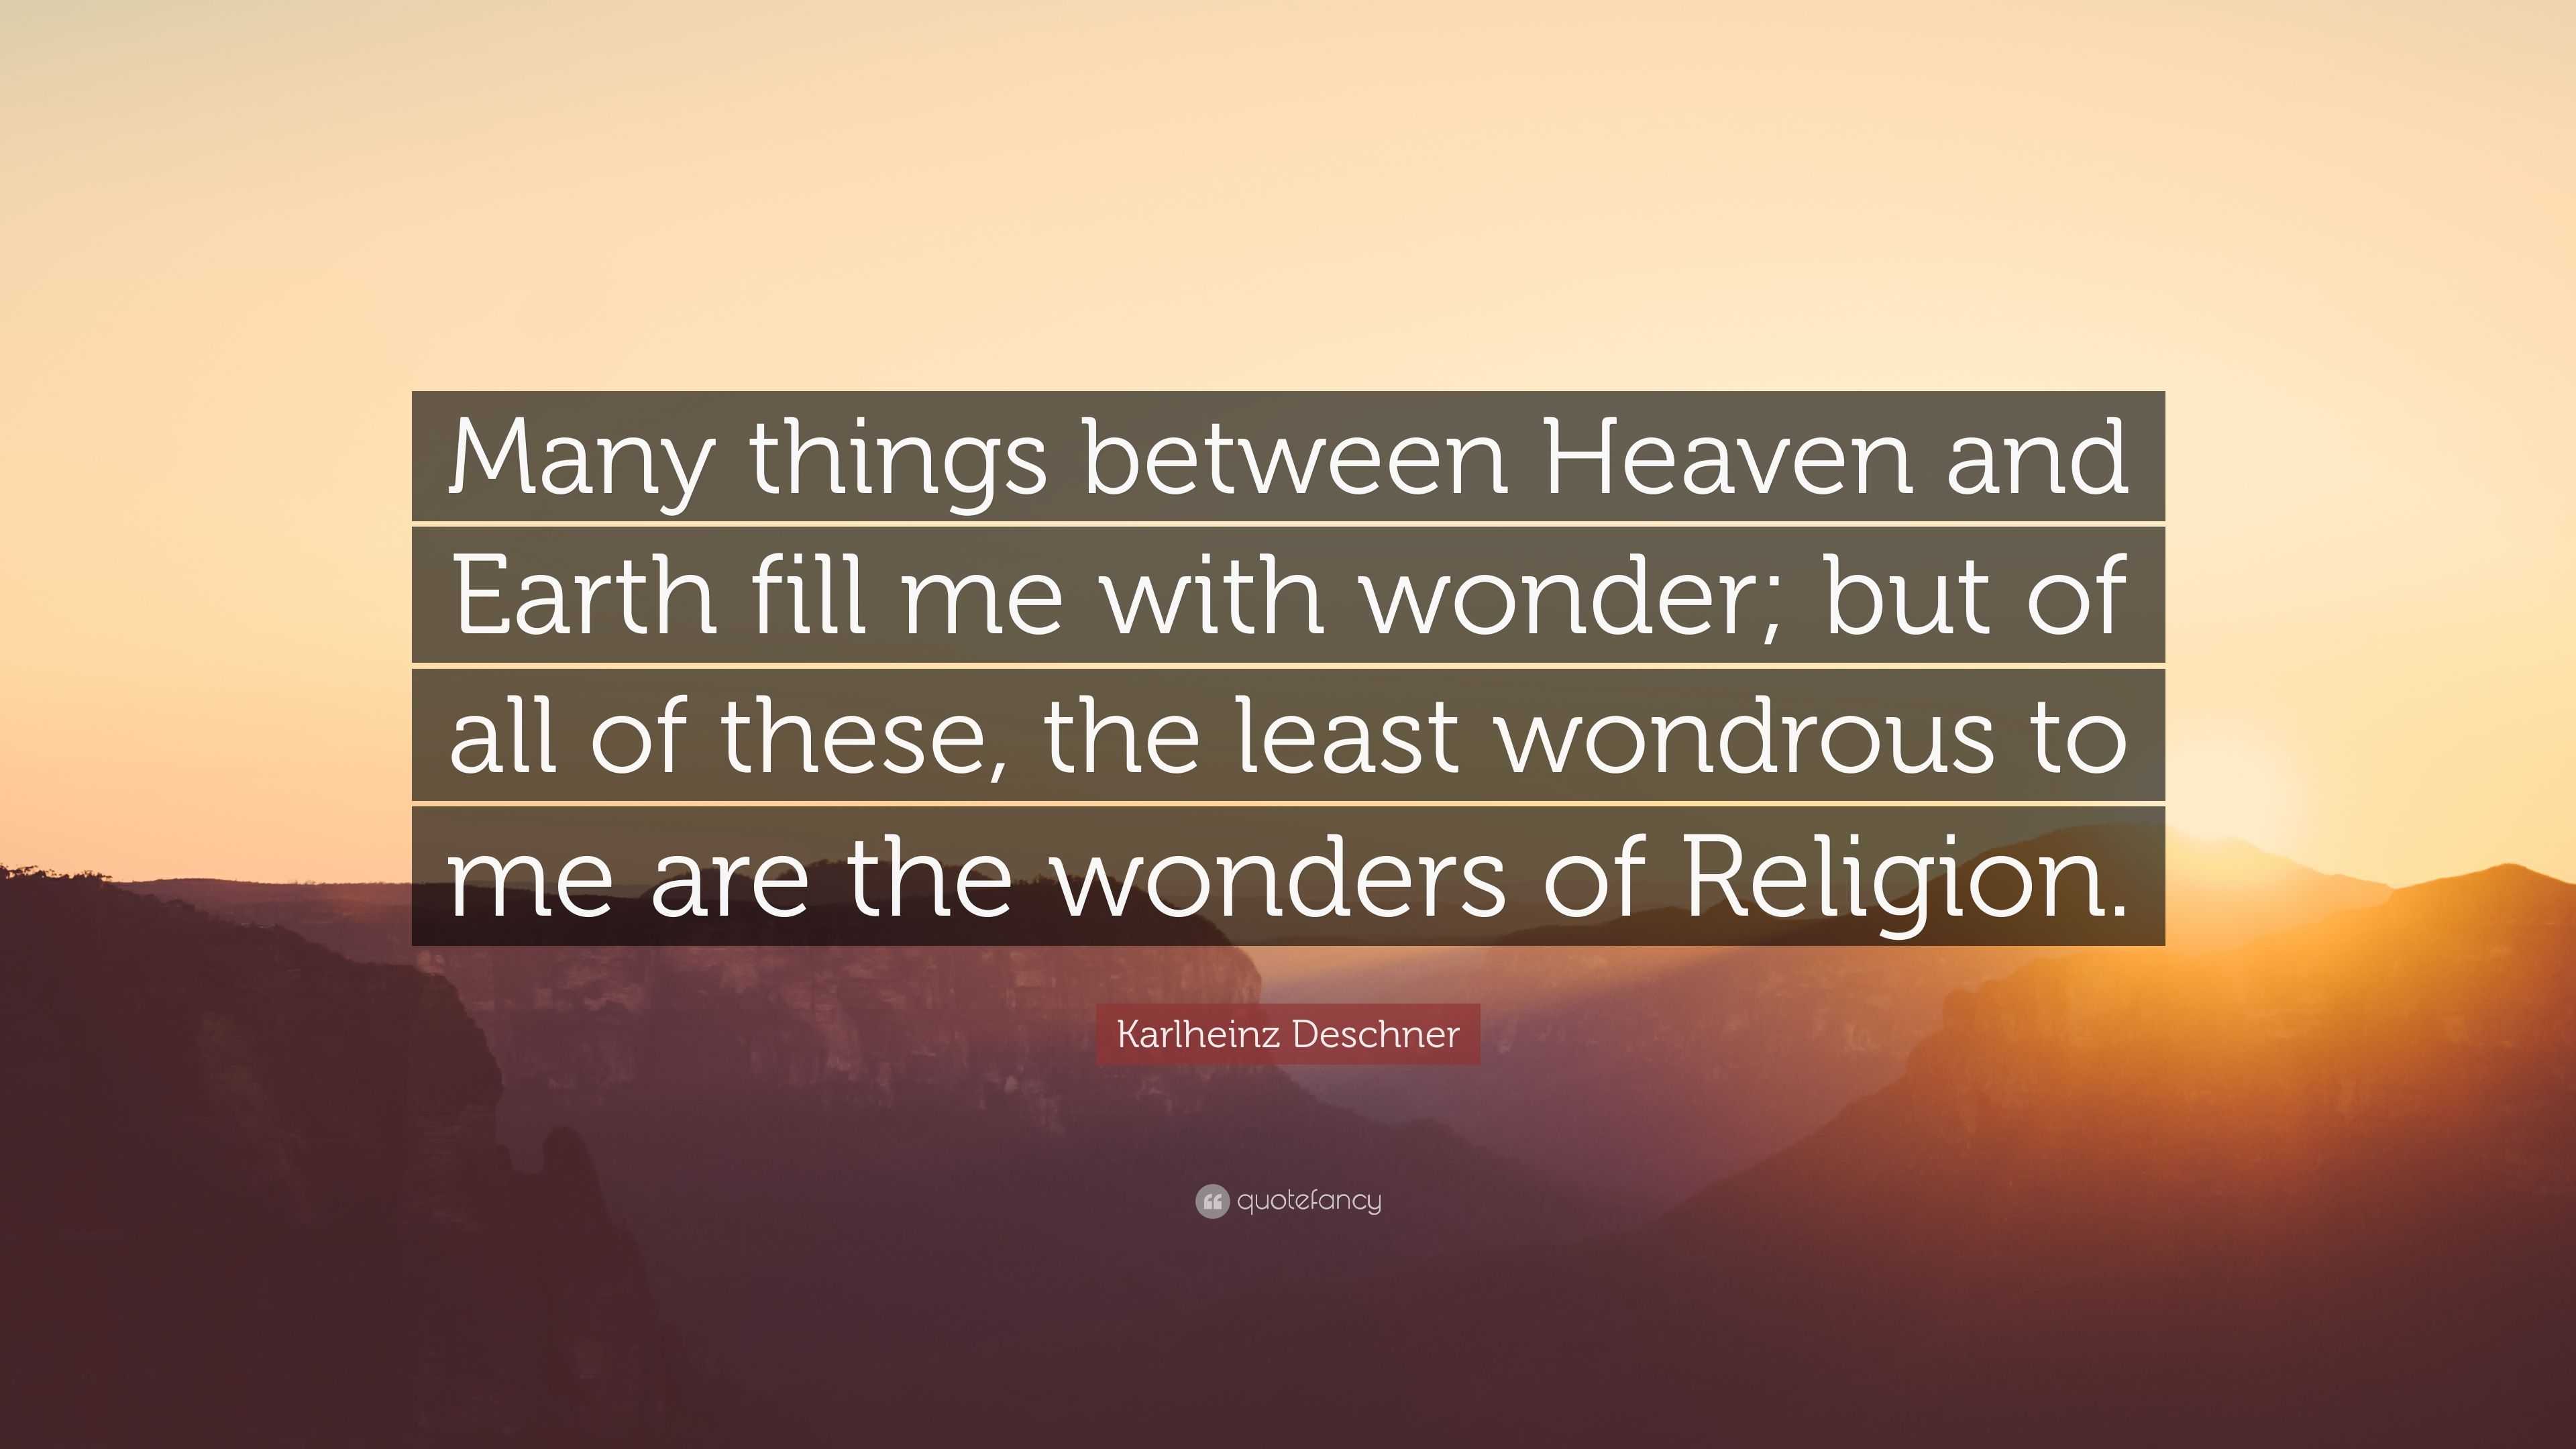 Karlheinz Deschner Quote: “Many things between Heaven and Earth fill me ...